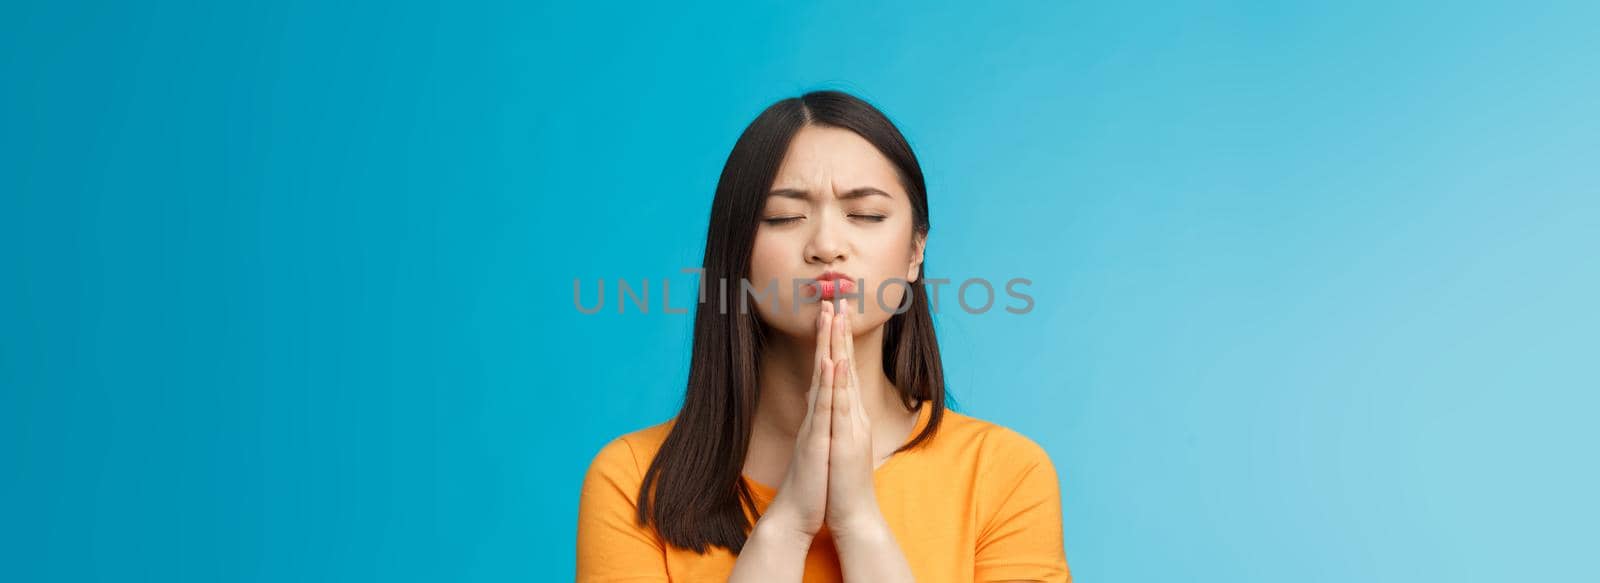 Determined motivated cute asian female praying dream come true, slap hands together pray pose, close eyes pouting eager win, achieve positive reply from university, stand blue background hopeful.